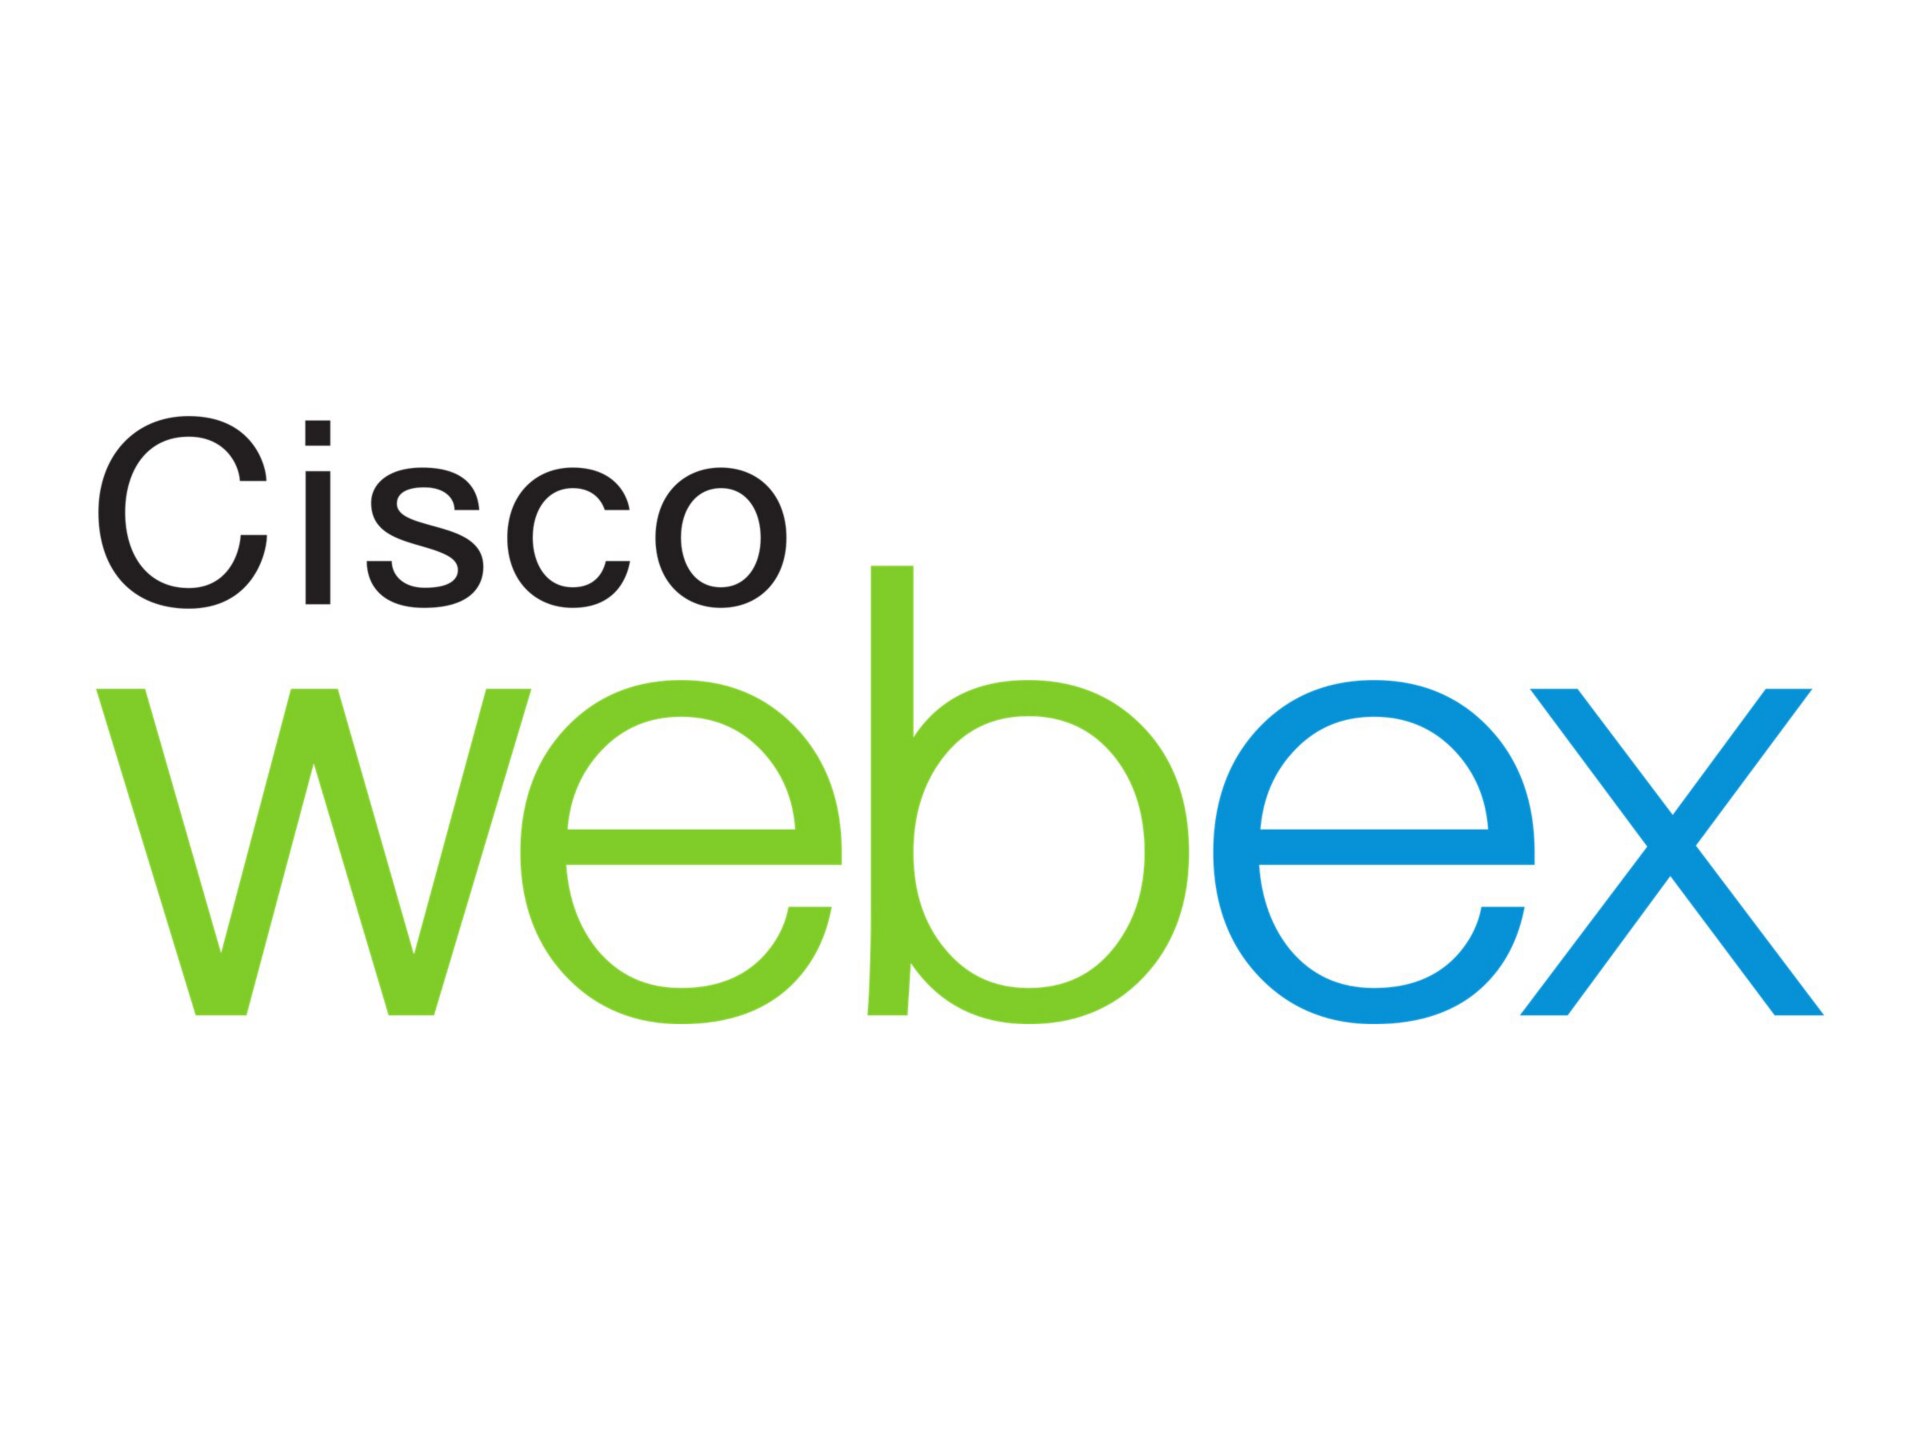 Cisco WebEx Cloud Storage - subscription license renewal (3 years) - additional 1 GB capacity